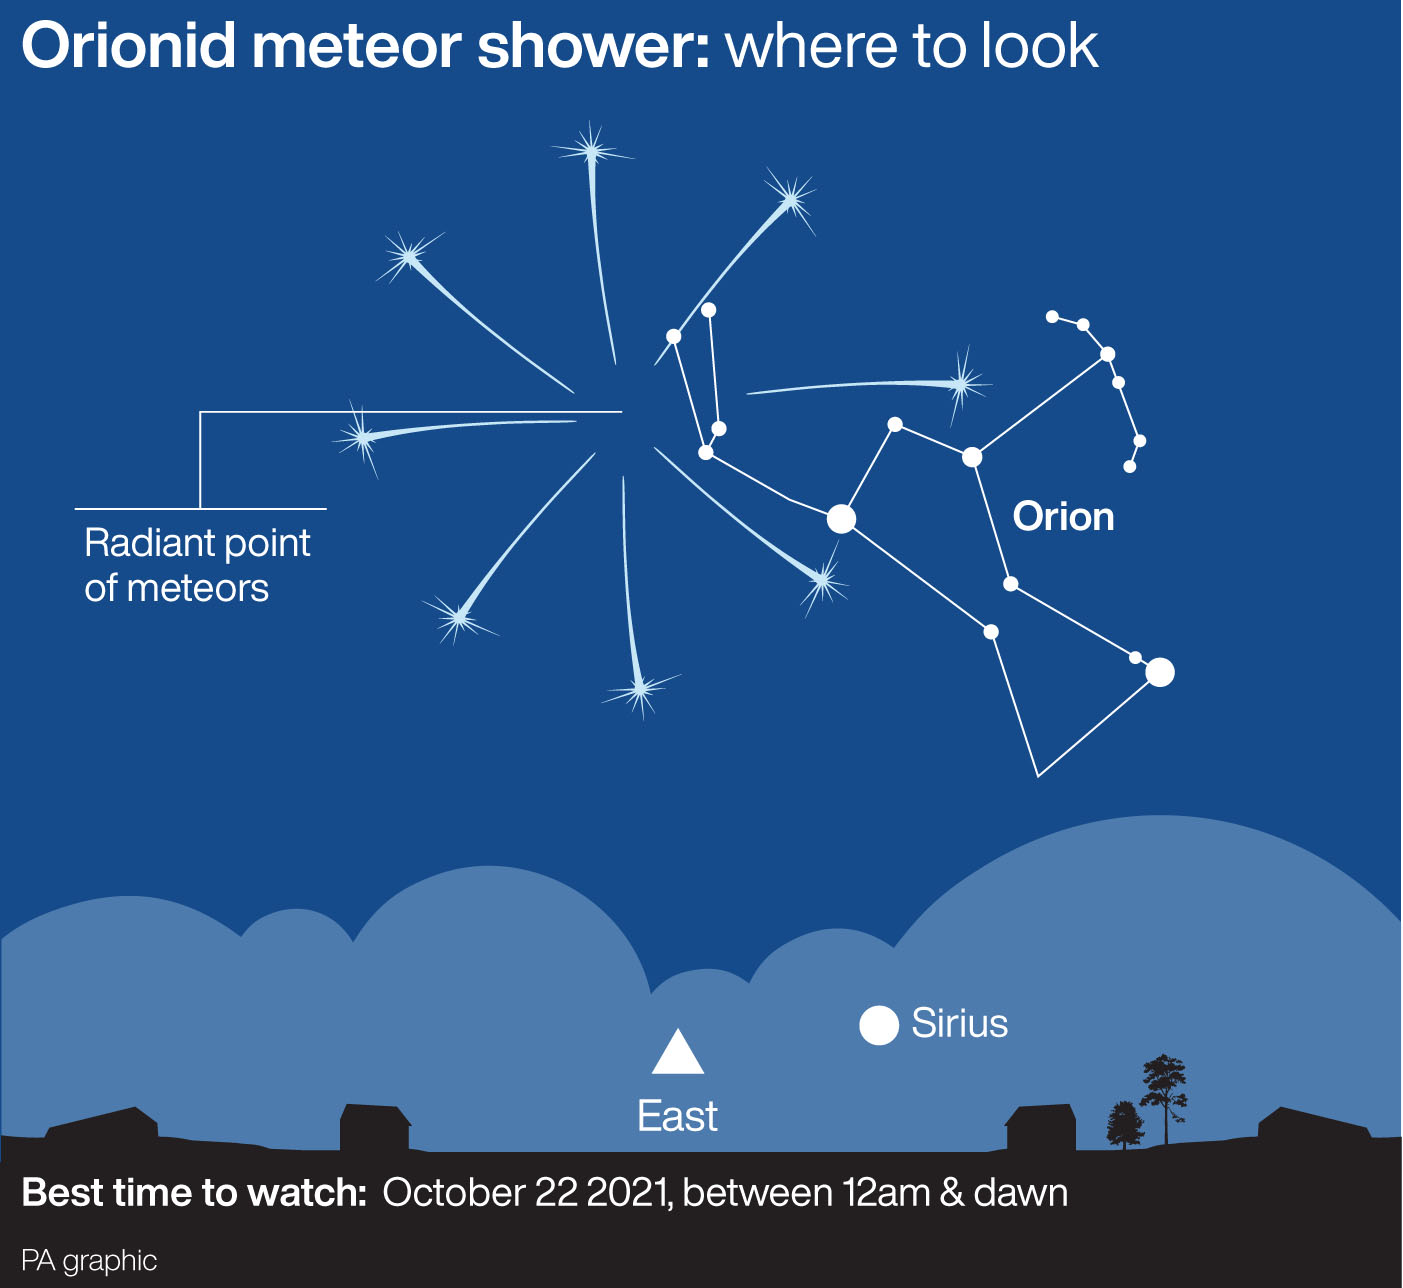 SCIENCE Orionids